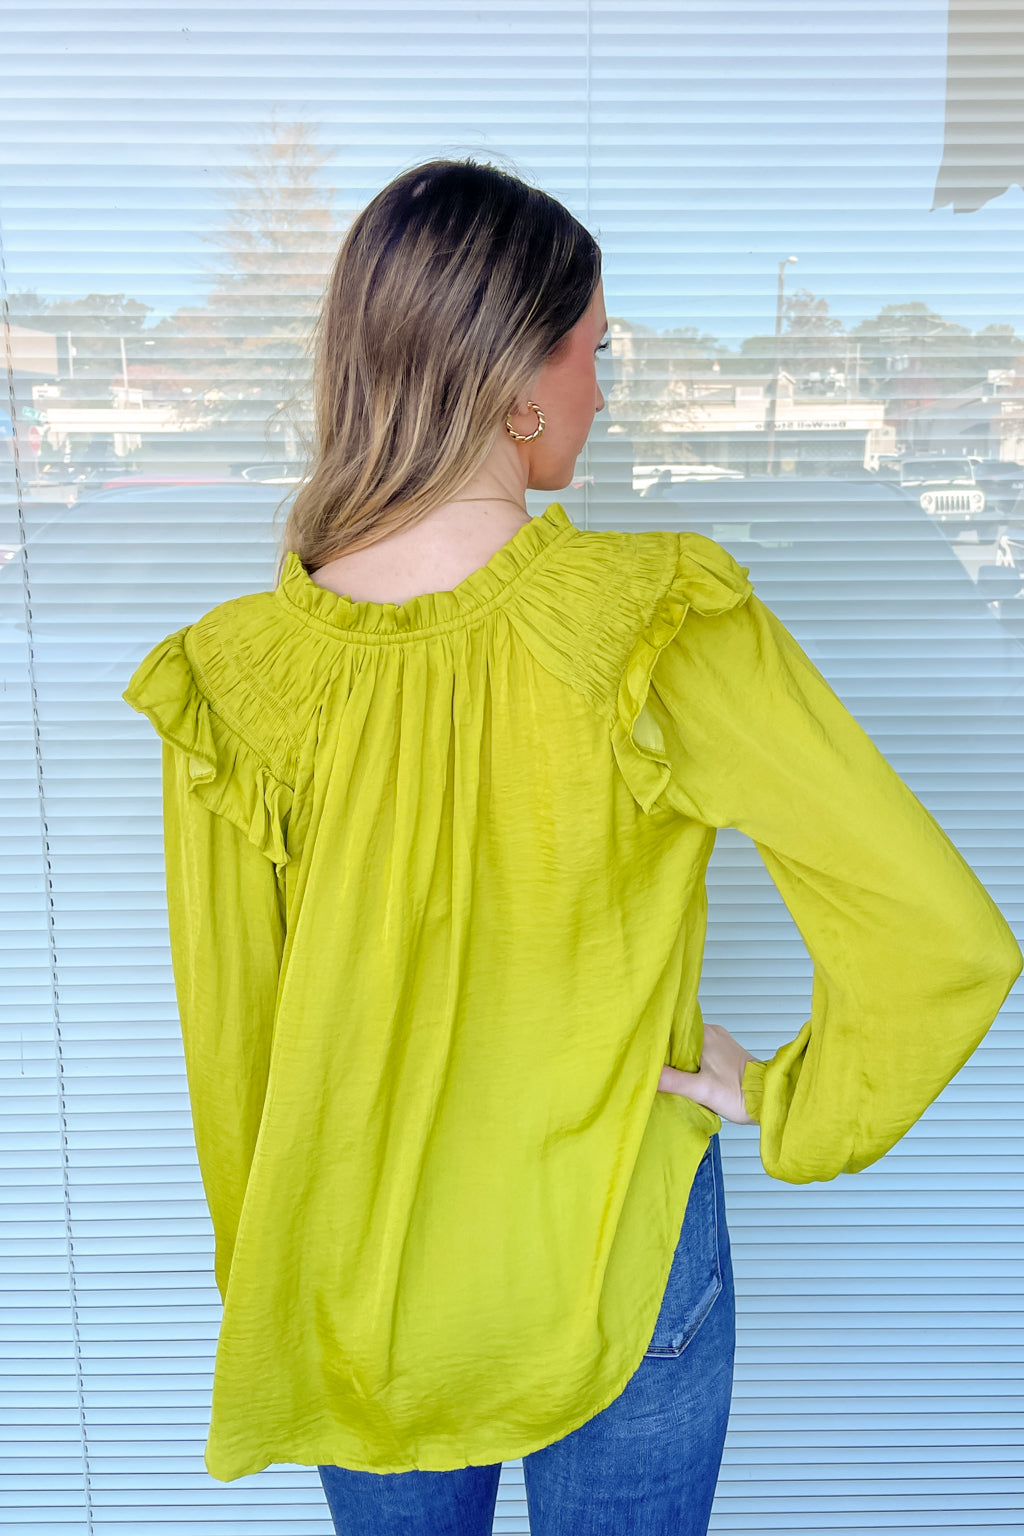 SALE-Together Forever Top-Chartreuse